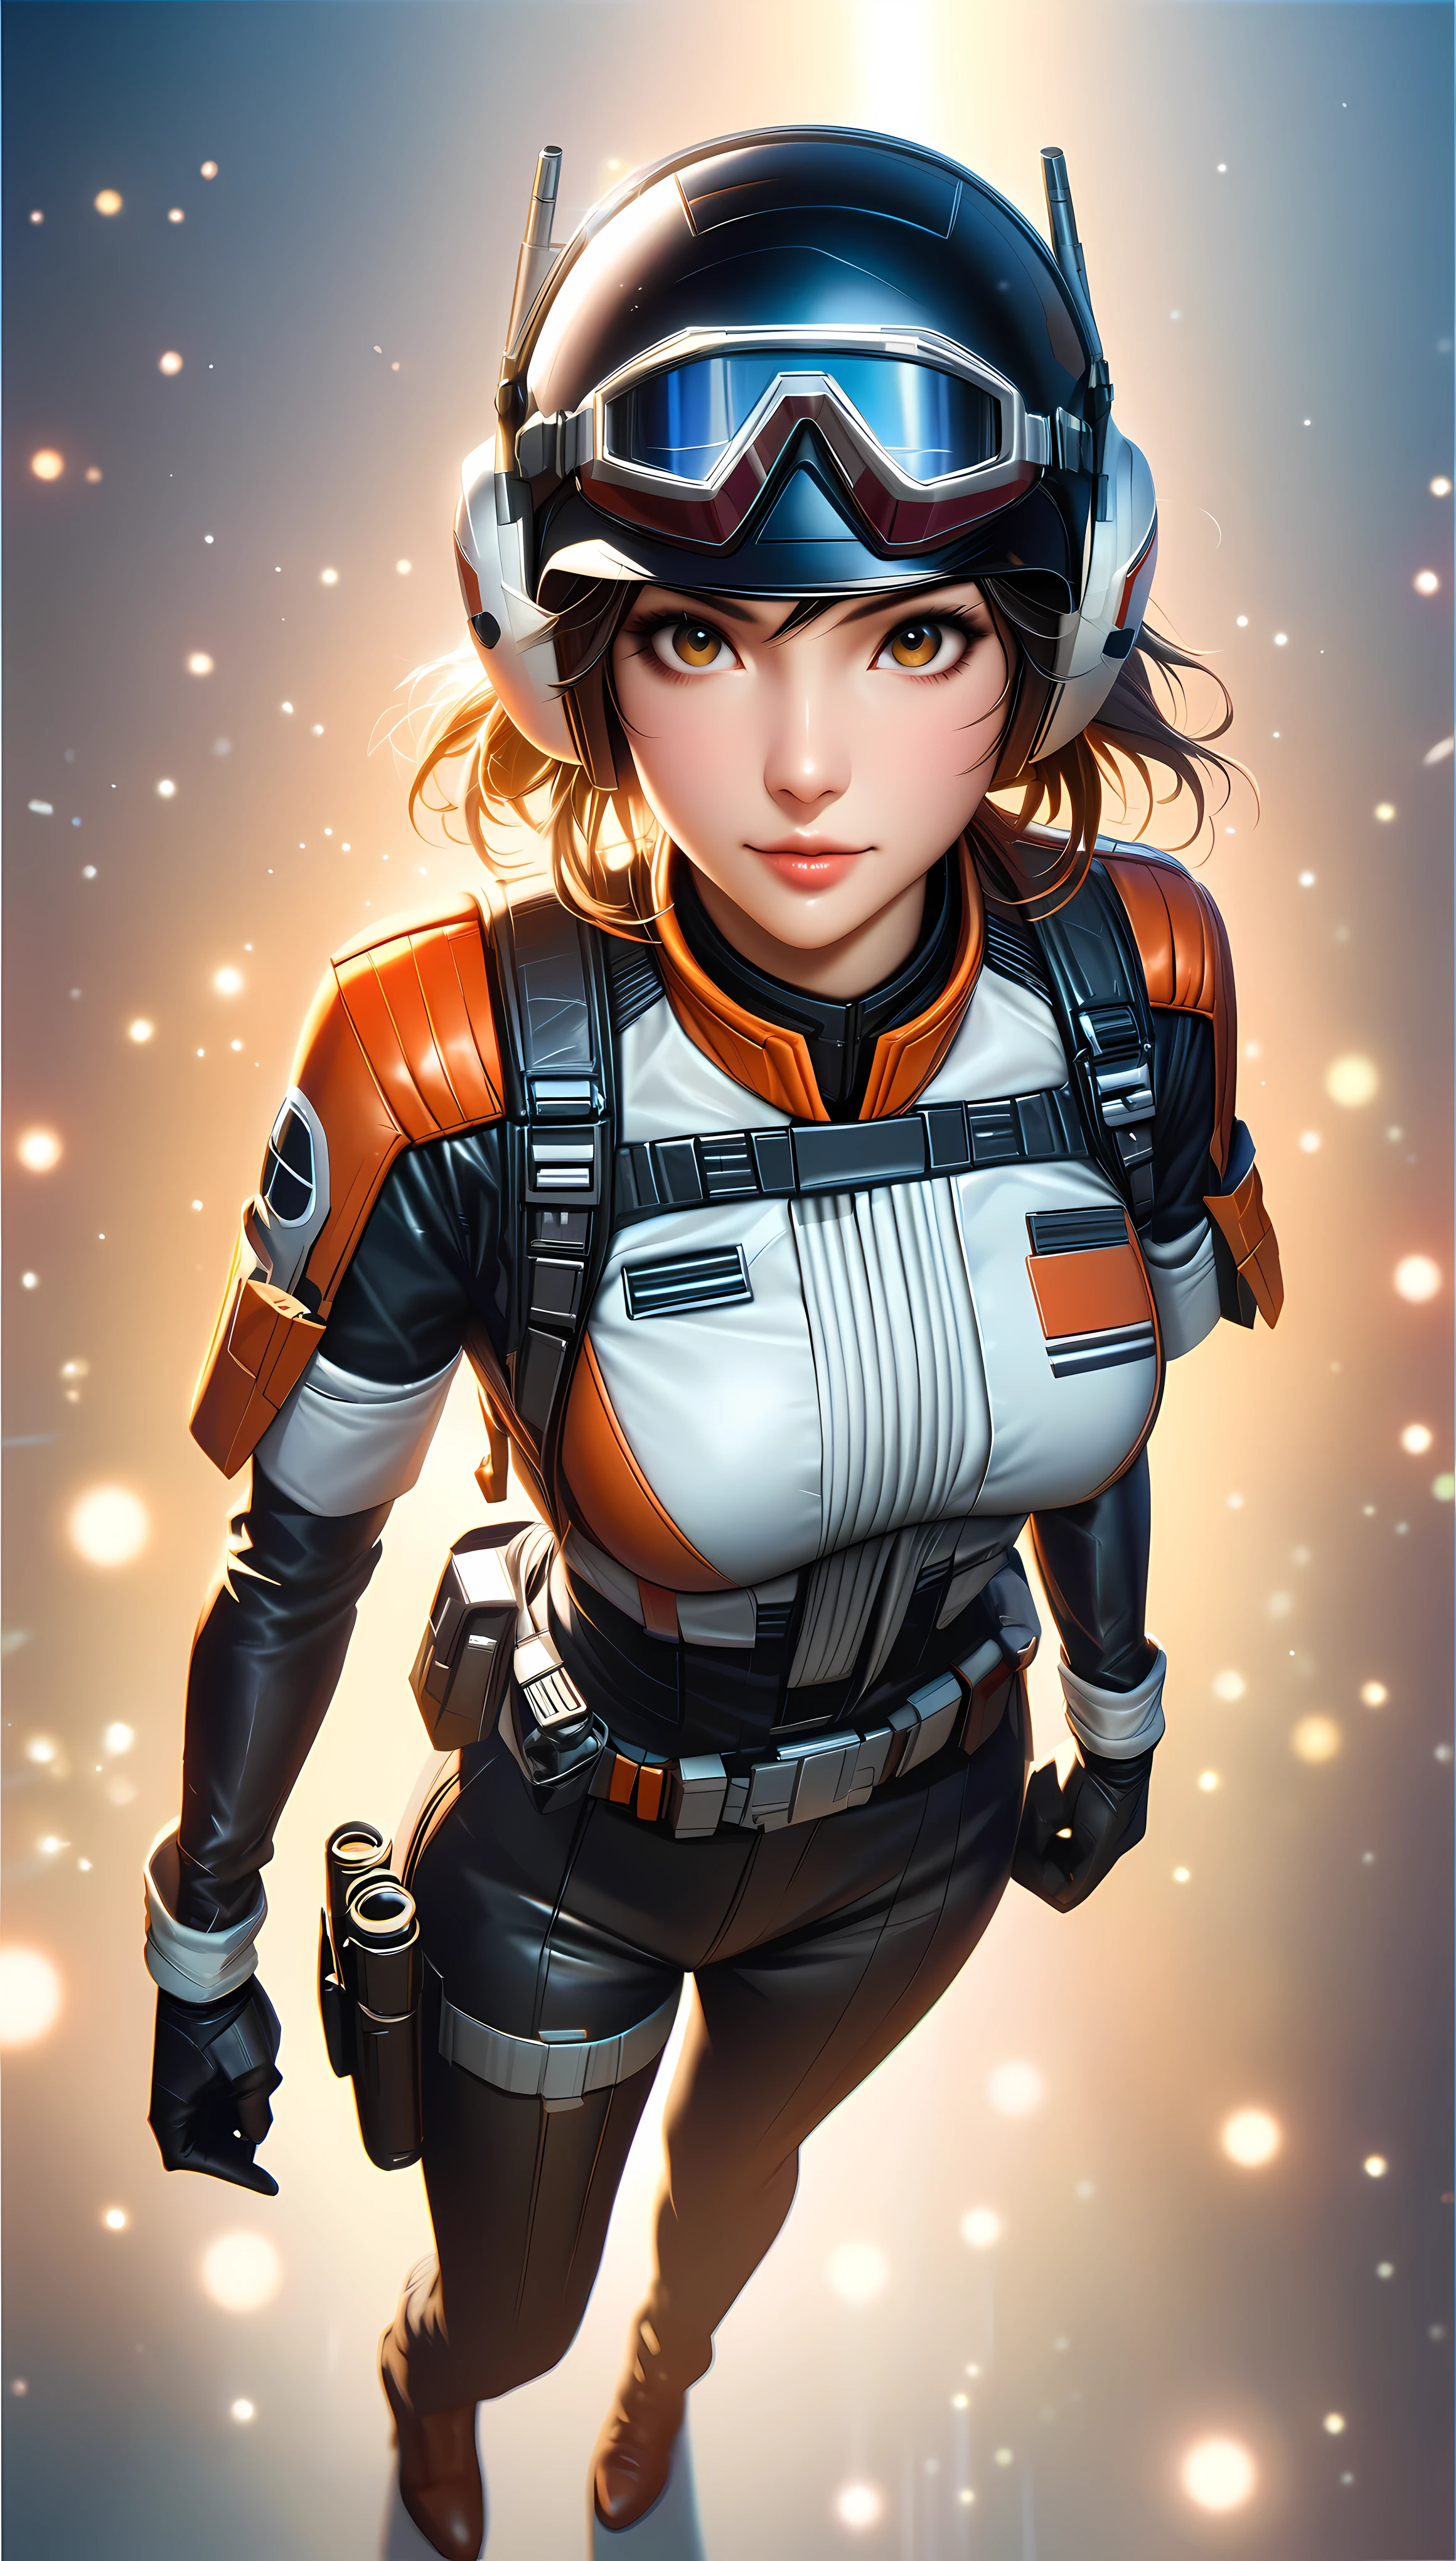 ((Masterpiece in maximum 16K resolution):1.6), ((vector cartoon illustration:)1.5), ((Vector art):1.4), ((Geometric style and minimalism):1.5), ((Wide angle painting):1.2), ((Vectorized):1.2) | ((Vector art of a A rebel alliance pilot in a Star Wars themed scene, wearing a detailed uniform with a flight helmet and goggles. The pilot is standing on a hangar deck:1.5), (Supermodel beauty with Red hair, very short pixie haircut and aquiline nose), ((Full body):1.2), ((Jedi Robe):1.6), ((Light Sabre):1.3), ((tyndall effect):1.1), ((golden hour):1.2), ((sense of action):1.1), (shimmer), (visual experience), (Realism), (Realistic), award-winning graphics, dark shot, film grain, extremely detailed, Digital Art, rtx, Unreal Engine, scene concept anti glare effect, All captured with sharp focus. Rendered in ultra-high definition with UHD and retina quality, this masterpiece ensures anatomical correctness and textured skin with super detail. With a focus on high quality and accuracy, this award-winning portrayal captures every nuance in stunning 16k resolution, immersing viewers in its lifelike depiction. Avoid extreme angles or exaggerated expressions to maintain realism. ((perfect_composition, perfect_design, perfect_layout, perfect_detail, ultra_detailed)), ((enhance_all, fix_everything)), More Detail, Enhance. Rendered in ultra-high definition with UHD and retina quality, this masterpiece ensures anatomical correctness and textured skin with super detail. With a focus on high quality and accuracy, this award-winning portrayal captures every nuance in stunning 16k resolution, immersing viewers in its lifelike depiction. Avoid extreme angles or exaggerated expressions to maintain realism. ((perfect_composition, perfect_design, perfect_layout, perfect_detail, ultra_detailed)), ((enhance_all, fix_everything)), More Detail, Enhance.